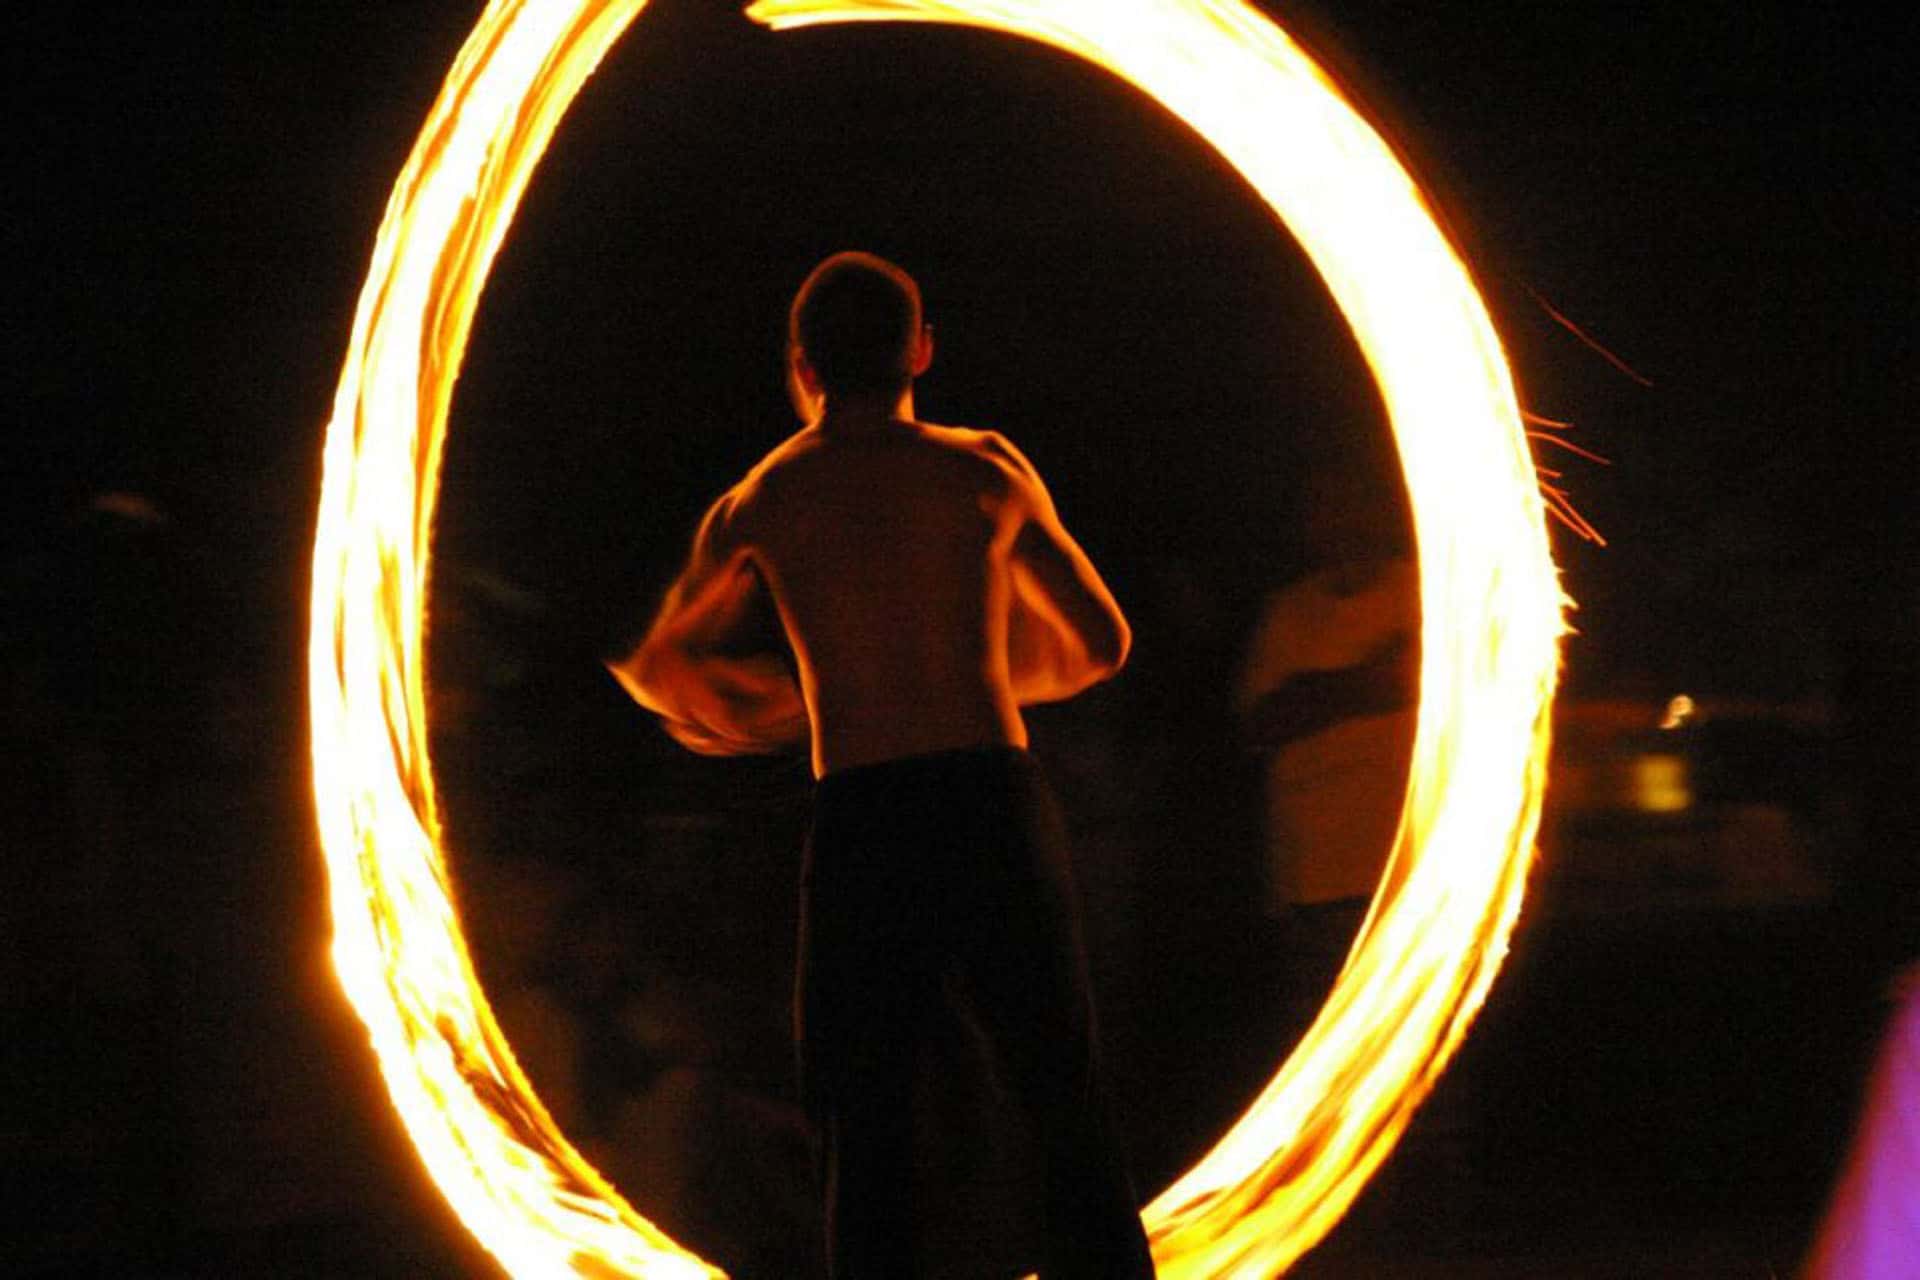 fire spinning is a popular nighttime activity on beaches in thailand